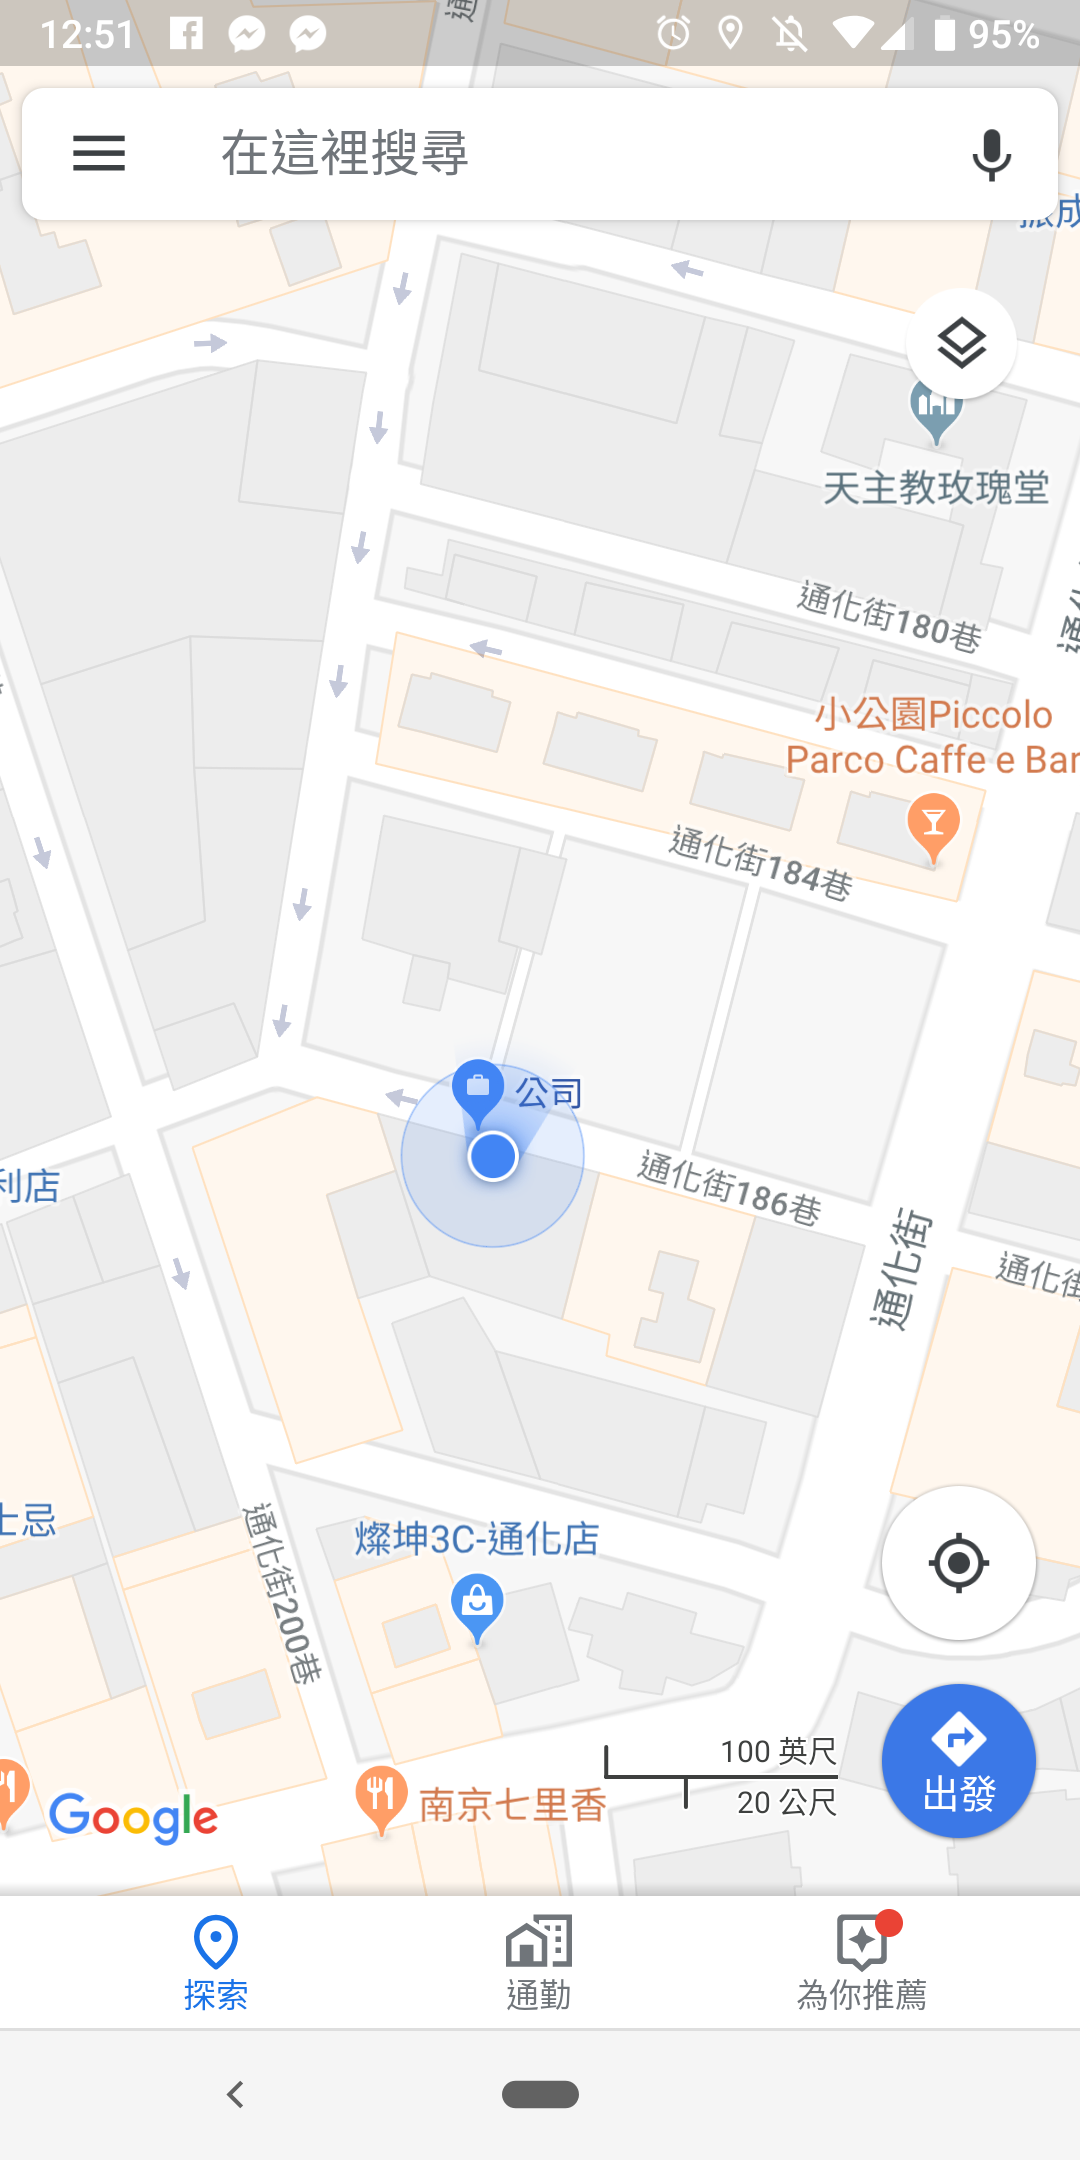 CBD Store Spain, Android, Oruxmaps, Google Maps, Map, Taoyuan, Taiwan, Calle la Niña, Android application package, Google My Maps, APKPure, map, map, text, line, area, font, screenshot, angle, product, diagram